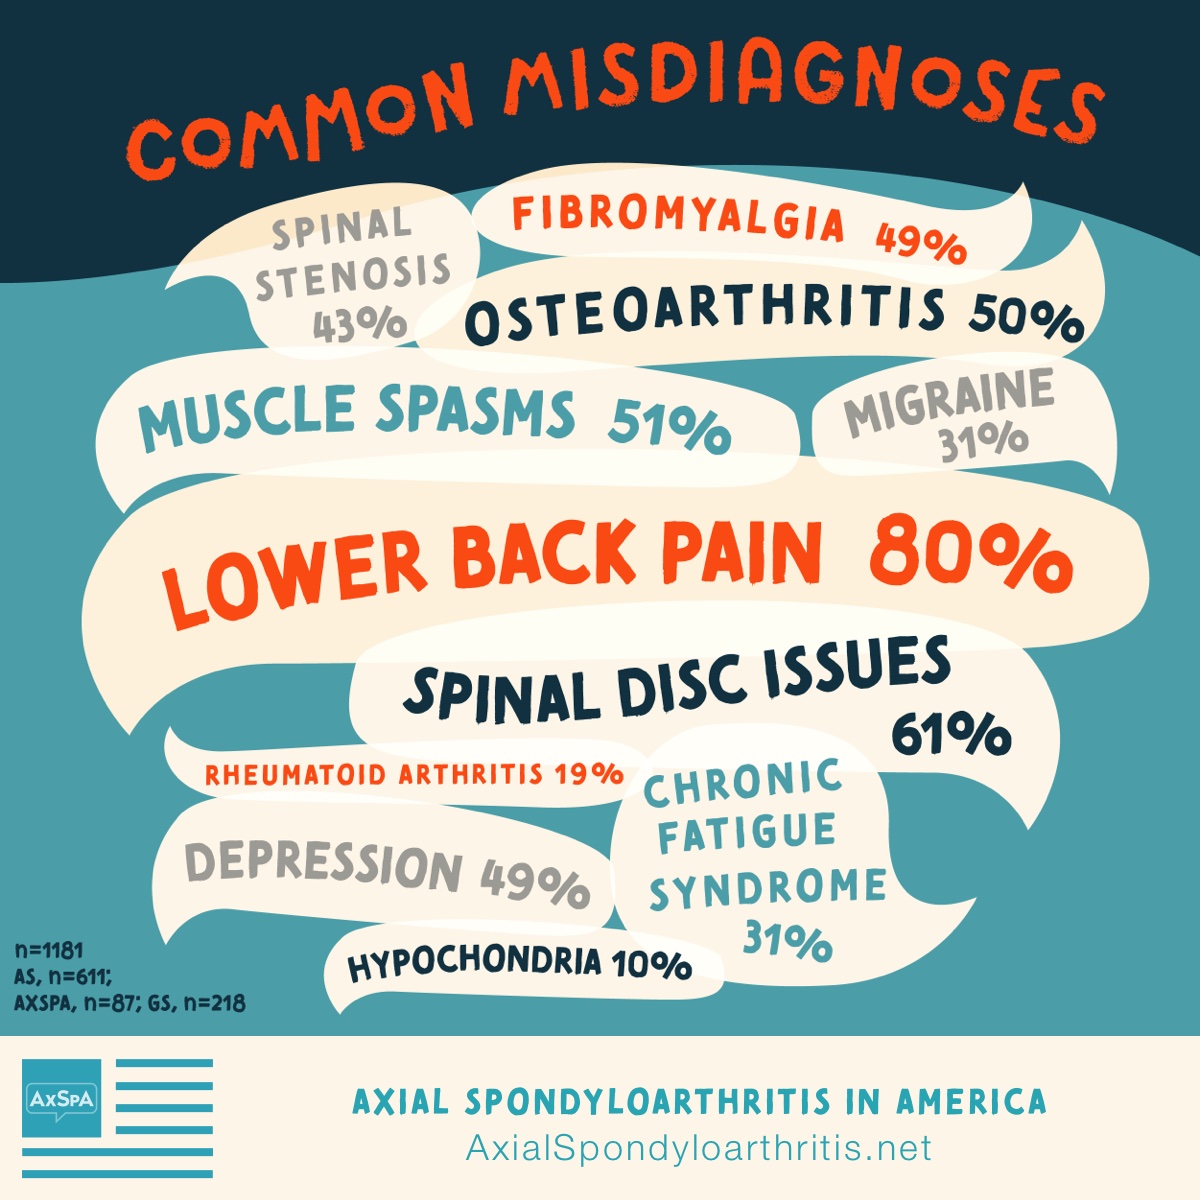 Data shows that people were misdiagnosed with low back pain (80%), spinal disc issues (61%), muscle spasms (51%), osteoarthritis (50%), depression (49%), fibromyalgia (49%) and spinal stenosis (43%).